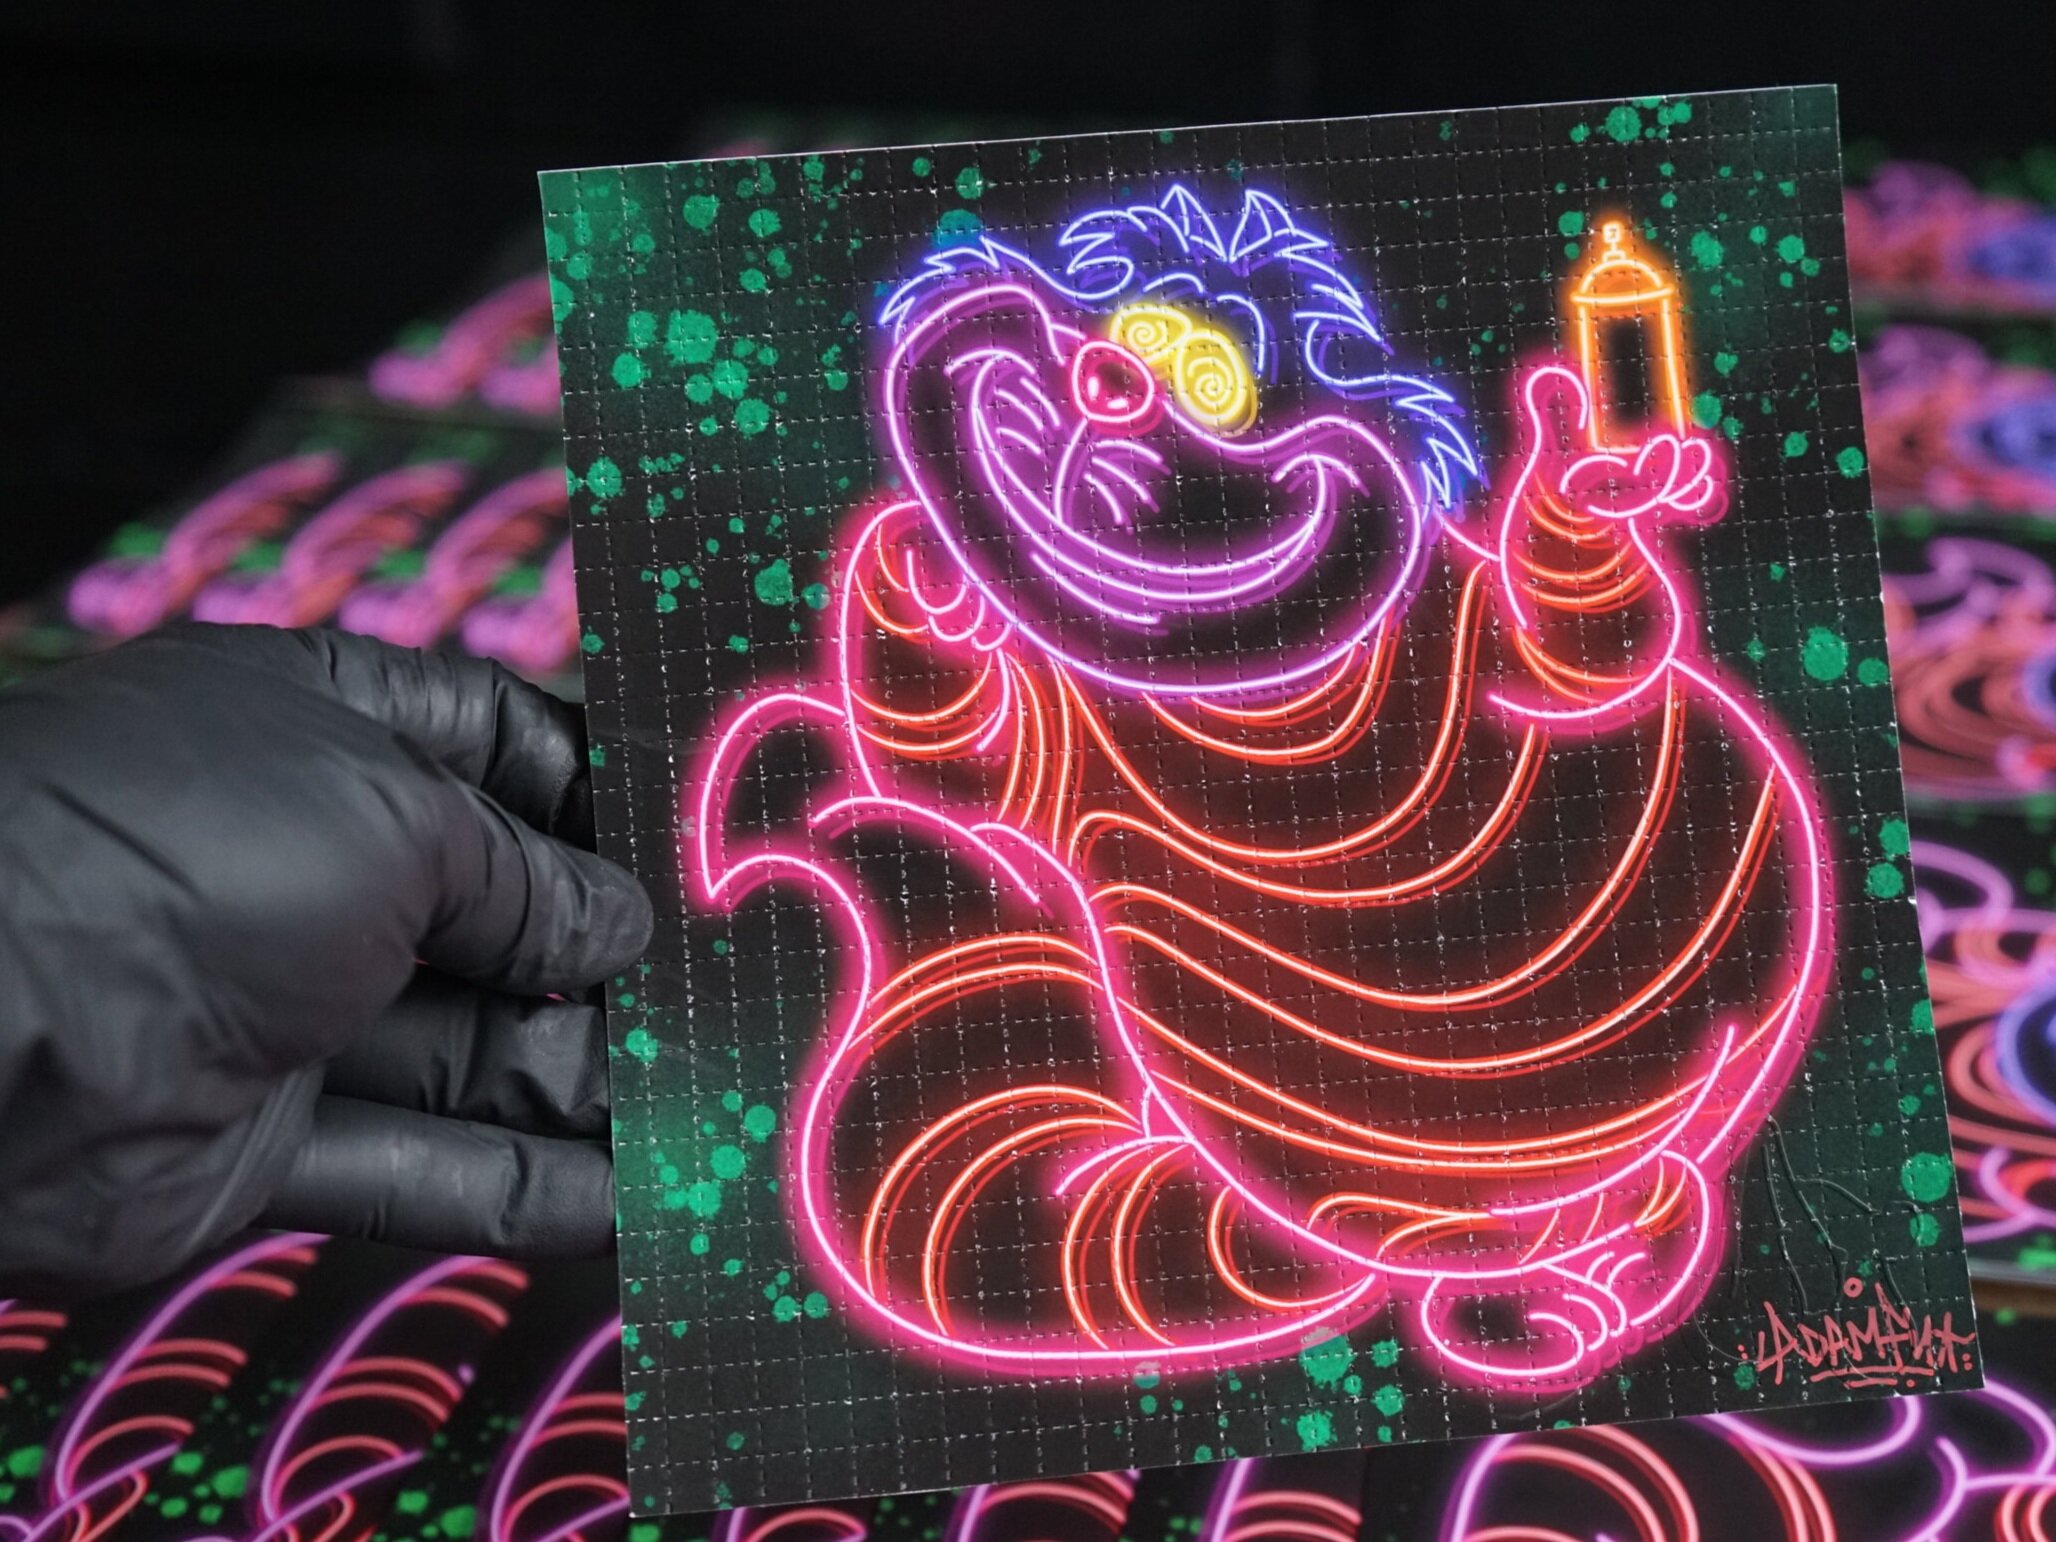 Artist Adam Fu has mastered creating neon effects with spray paint / Boing  Boing